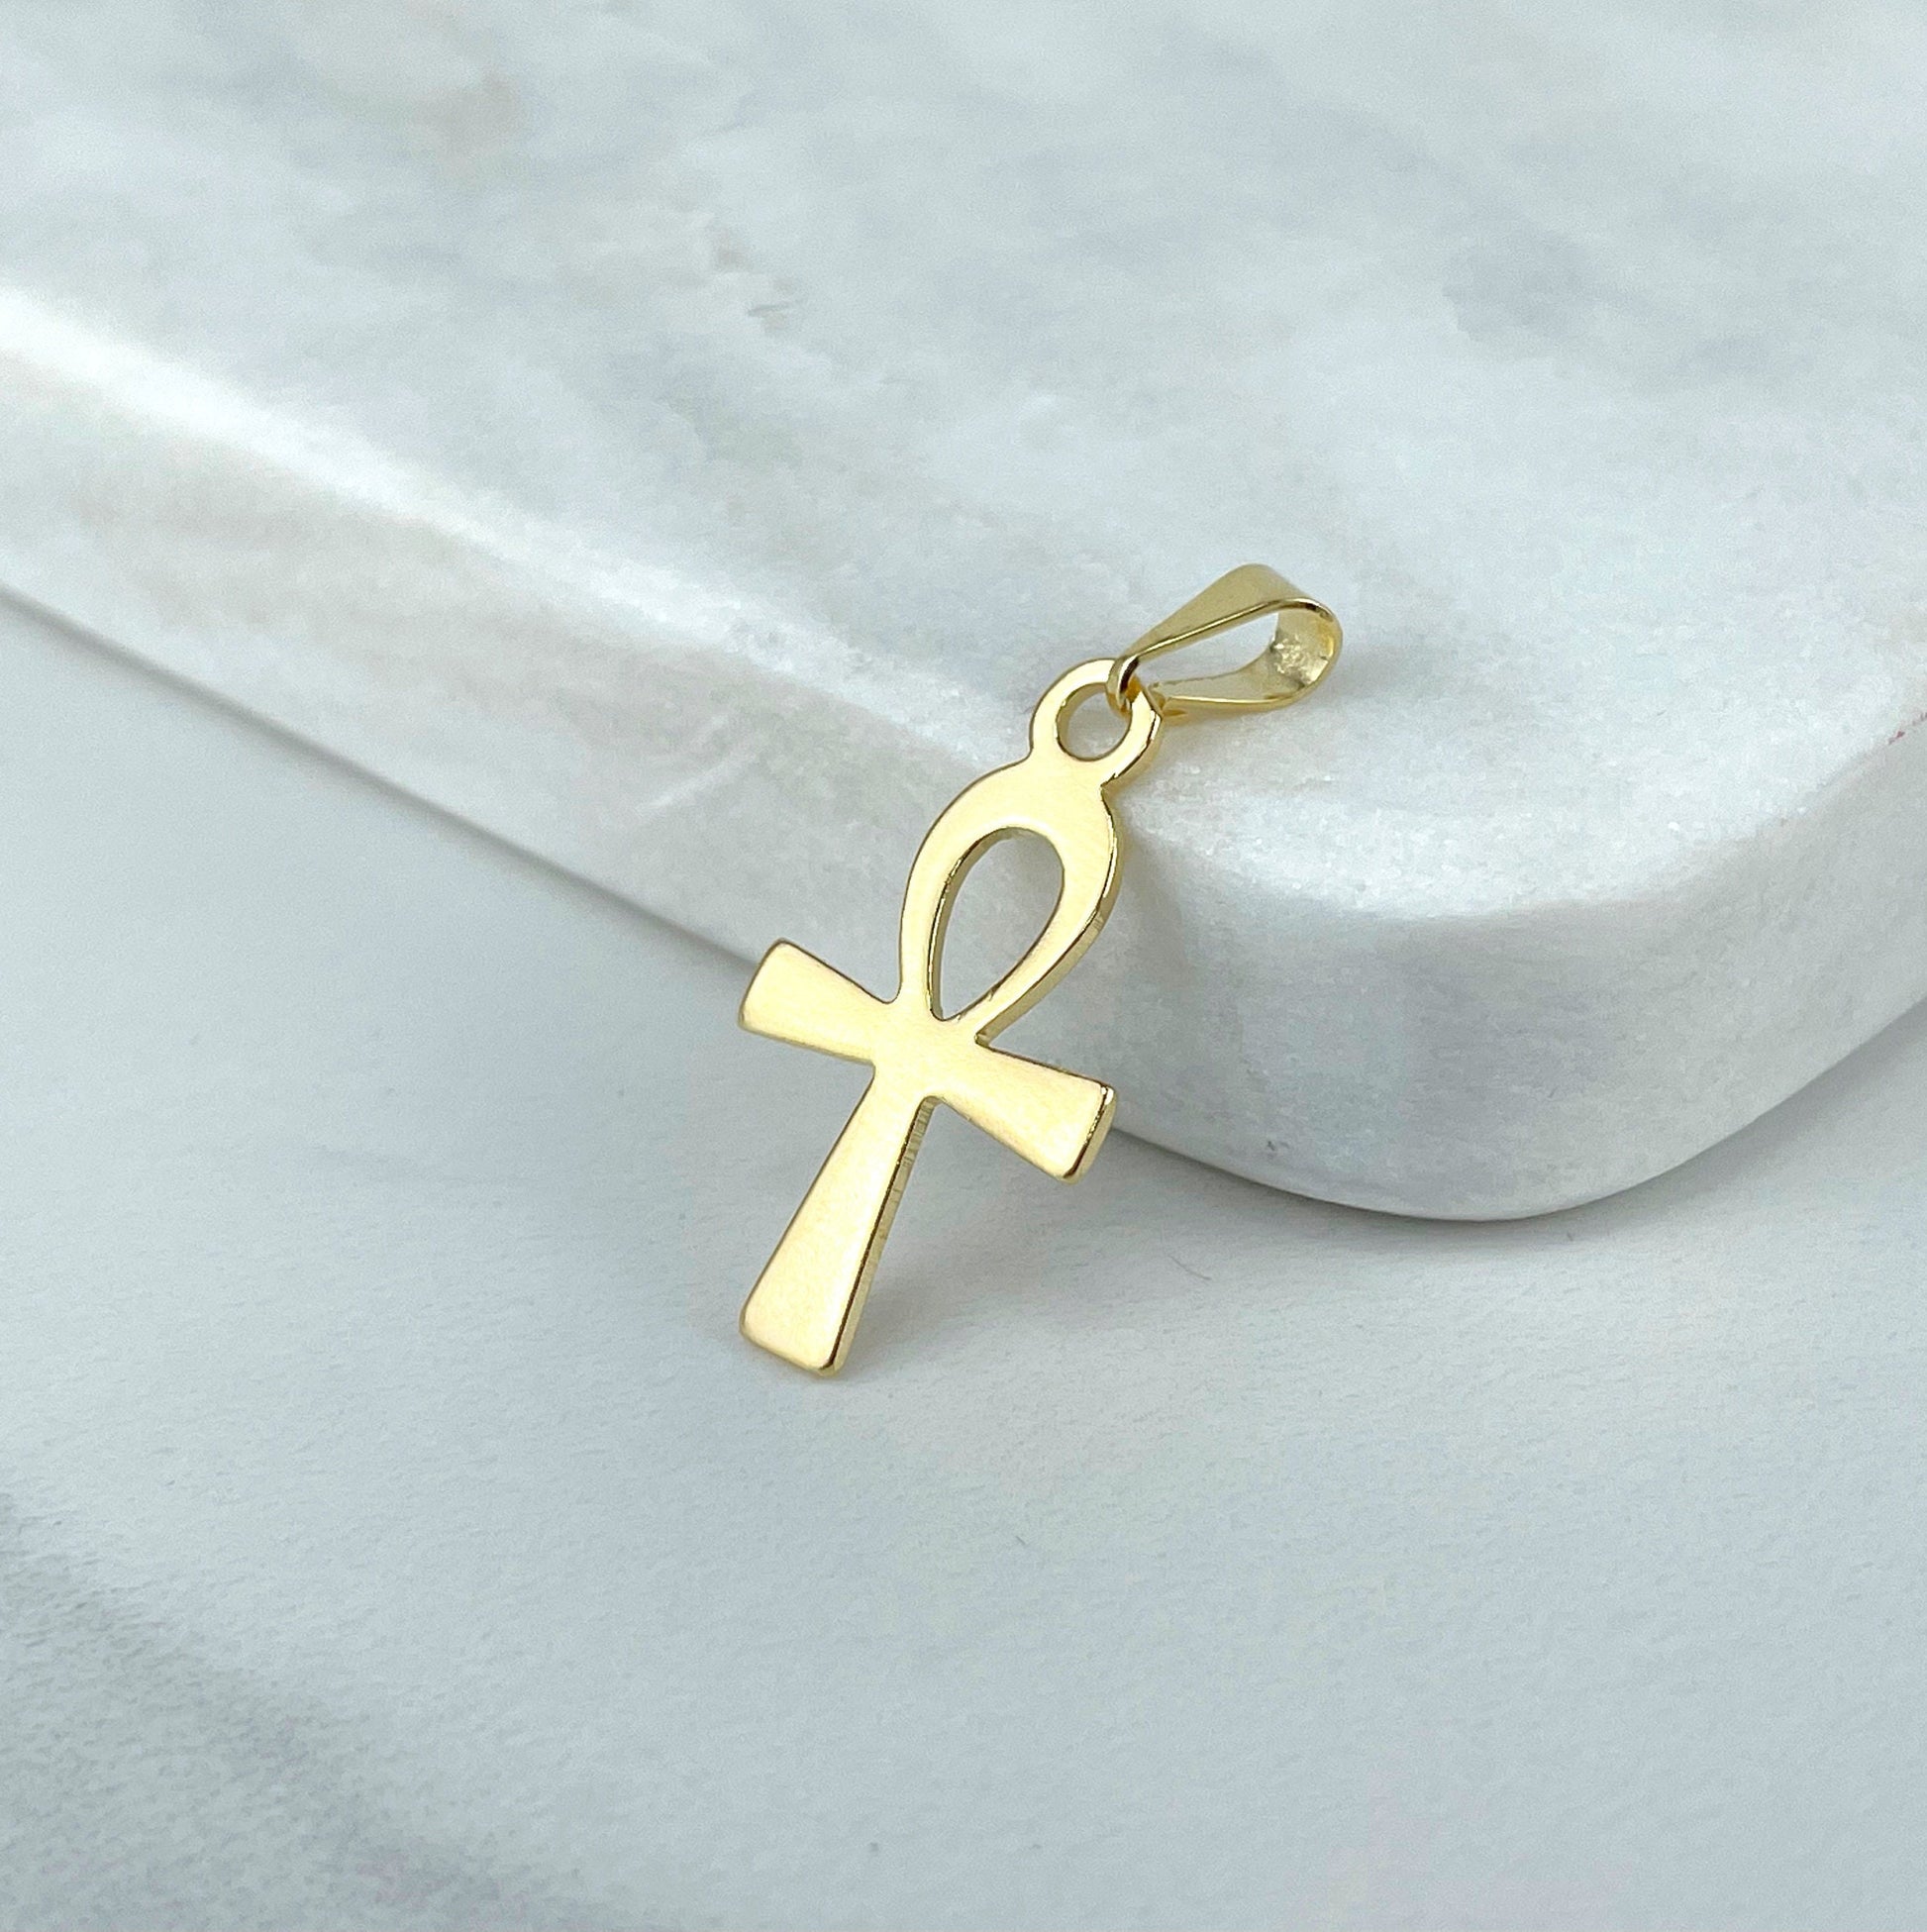 18k Gold Filled Ankh, Crucifix or Cubic Zirconia Cross Charms Pendant, Wholesale Jewelry Making Supplies